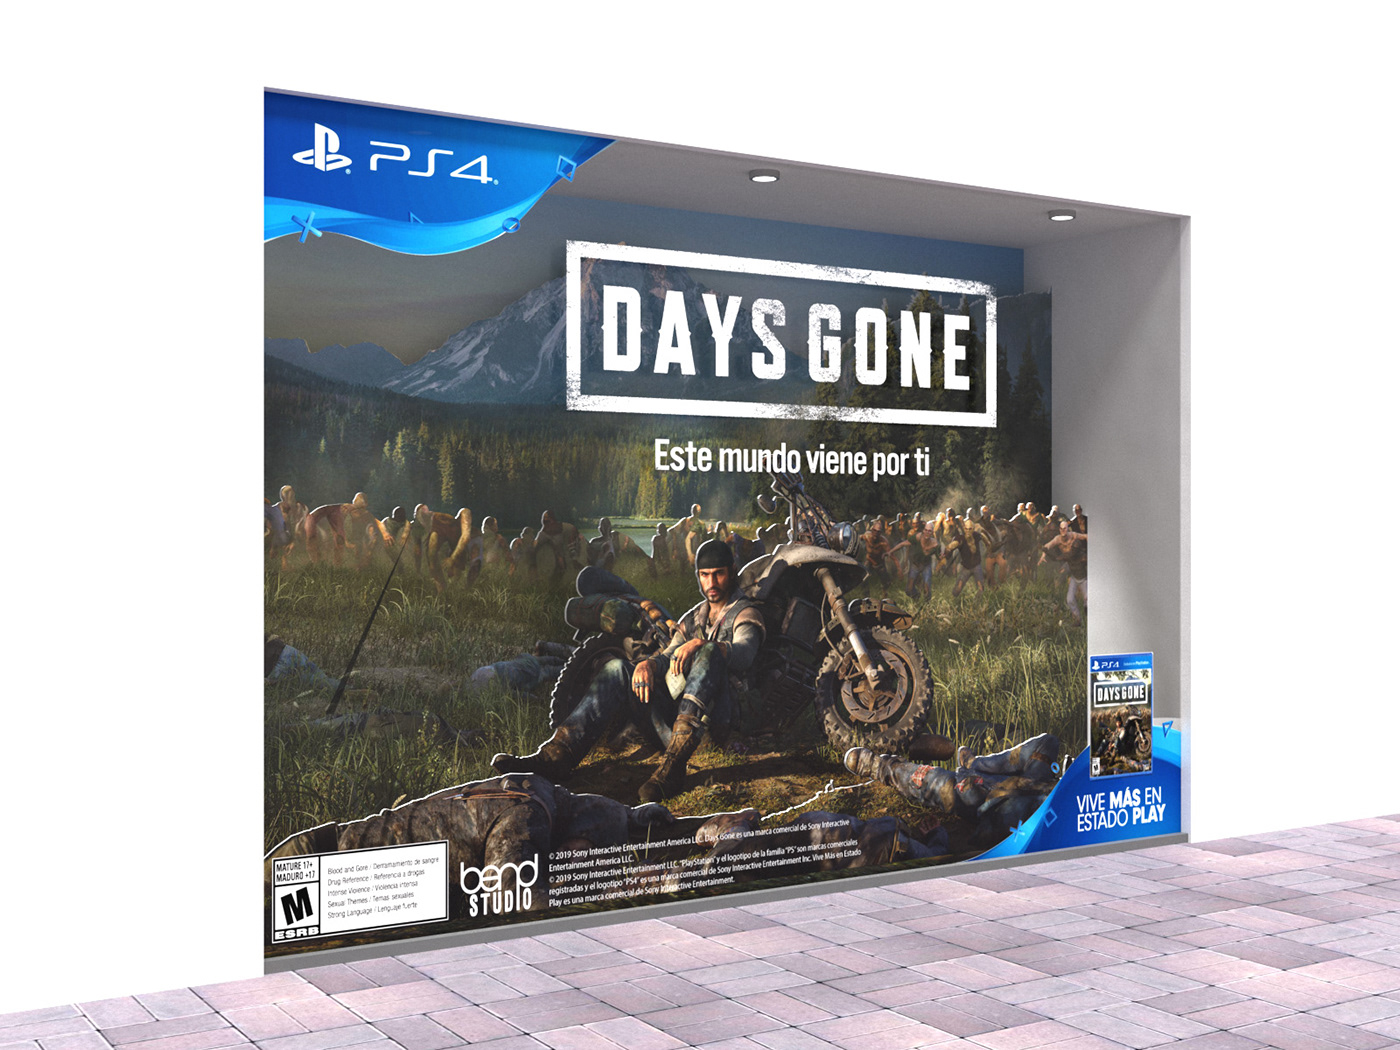 Days Gone playsation Retail activation Gaming Gamer pointofsale store Display showcase